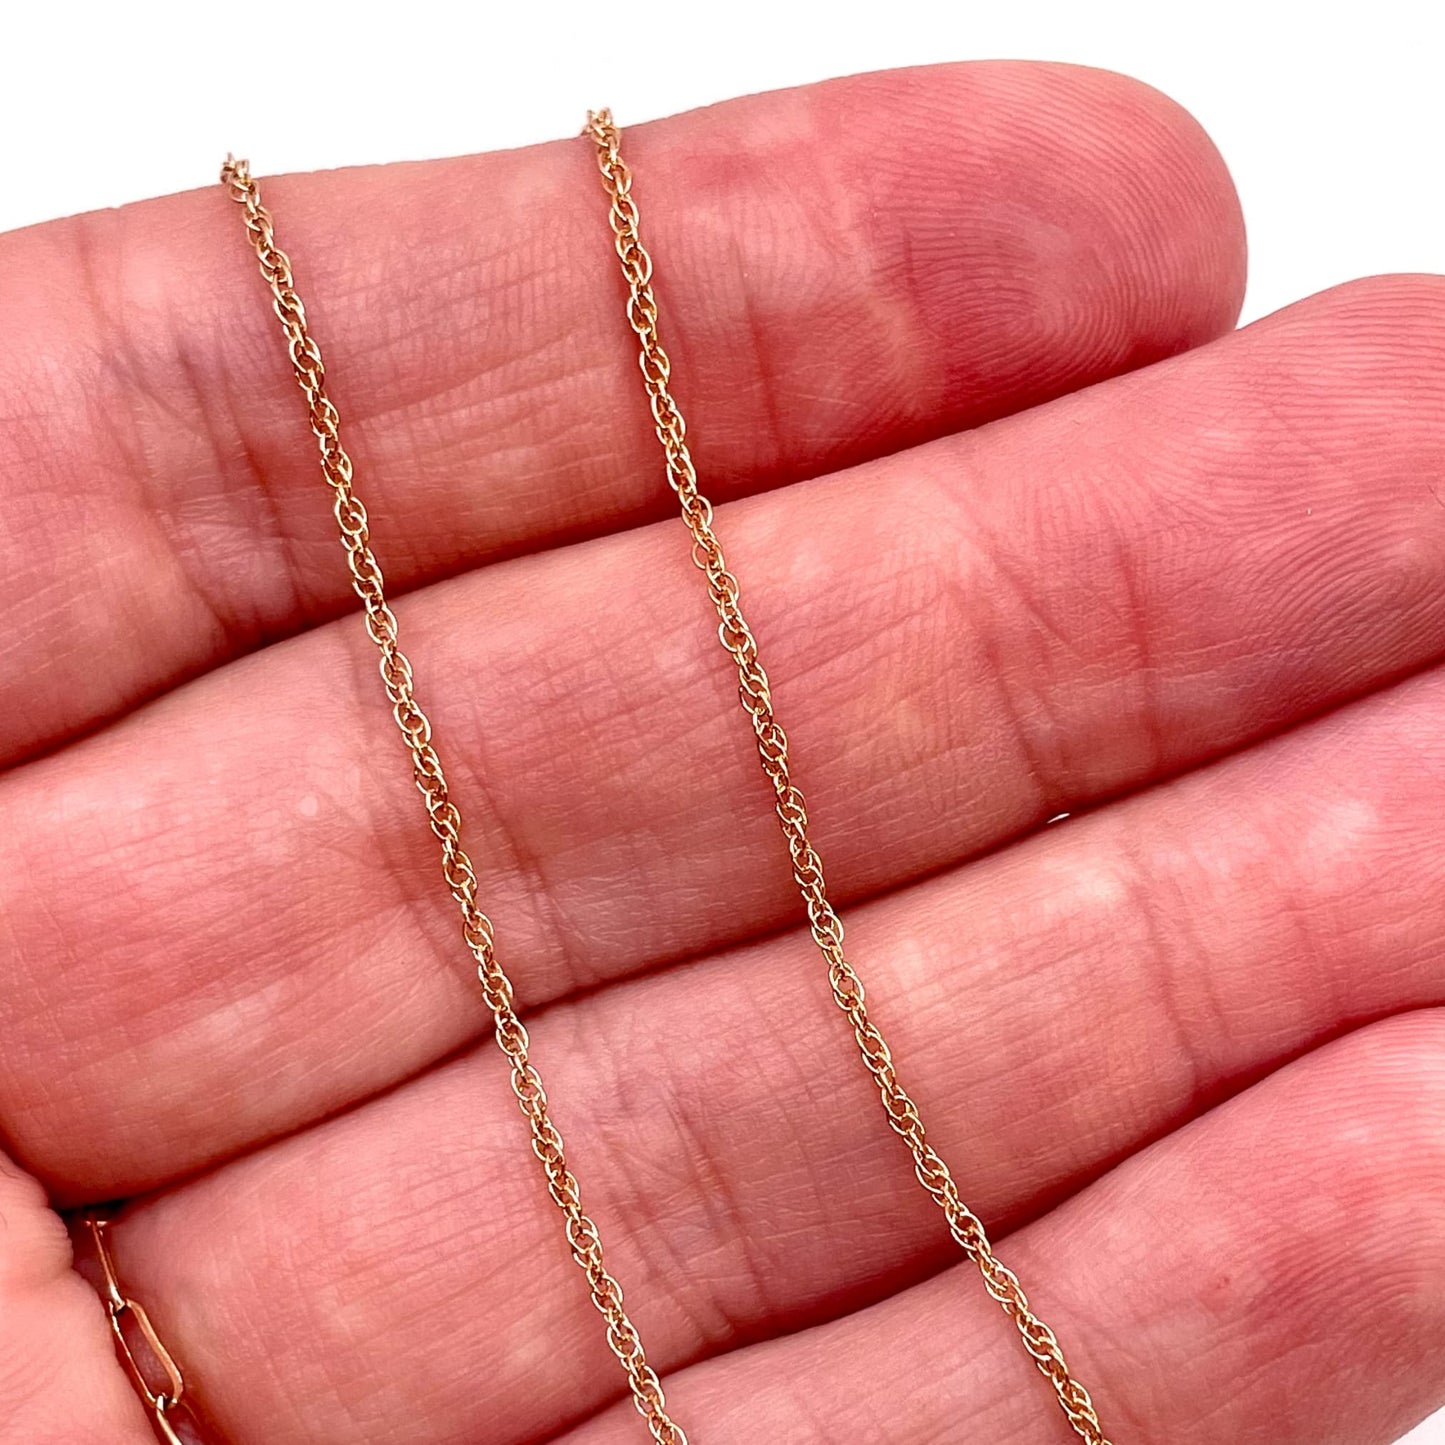 Actual photo of a 14k rose gold filled rope chain for permanent jewelry.